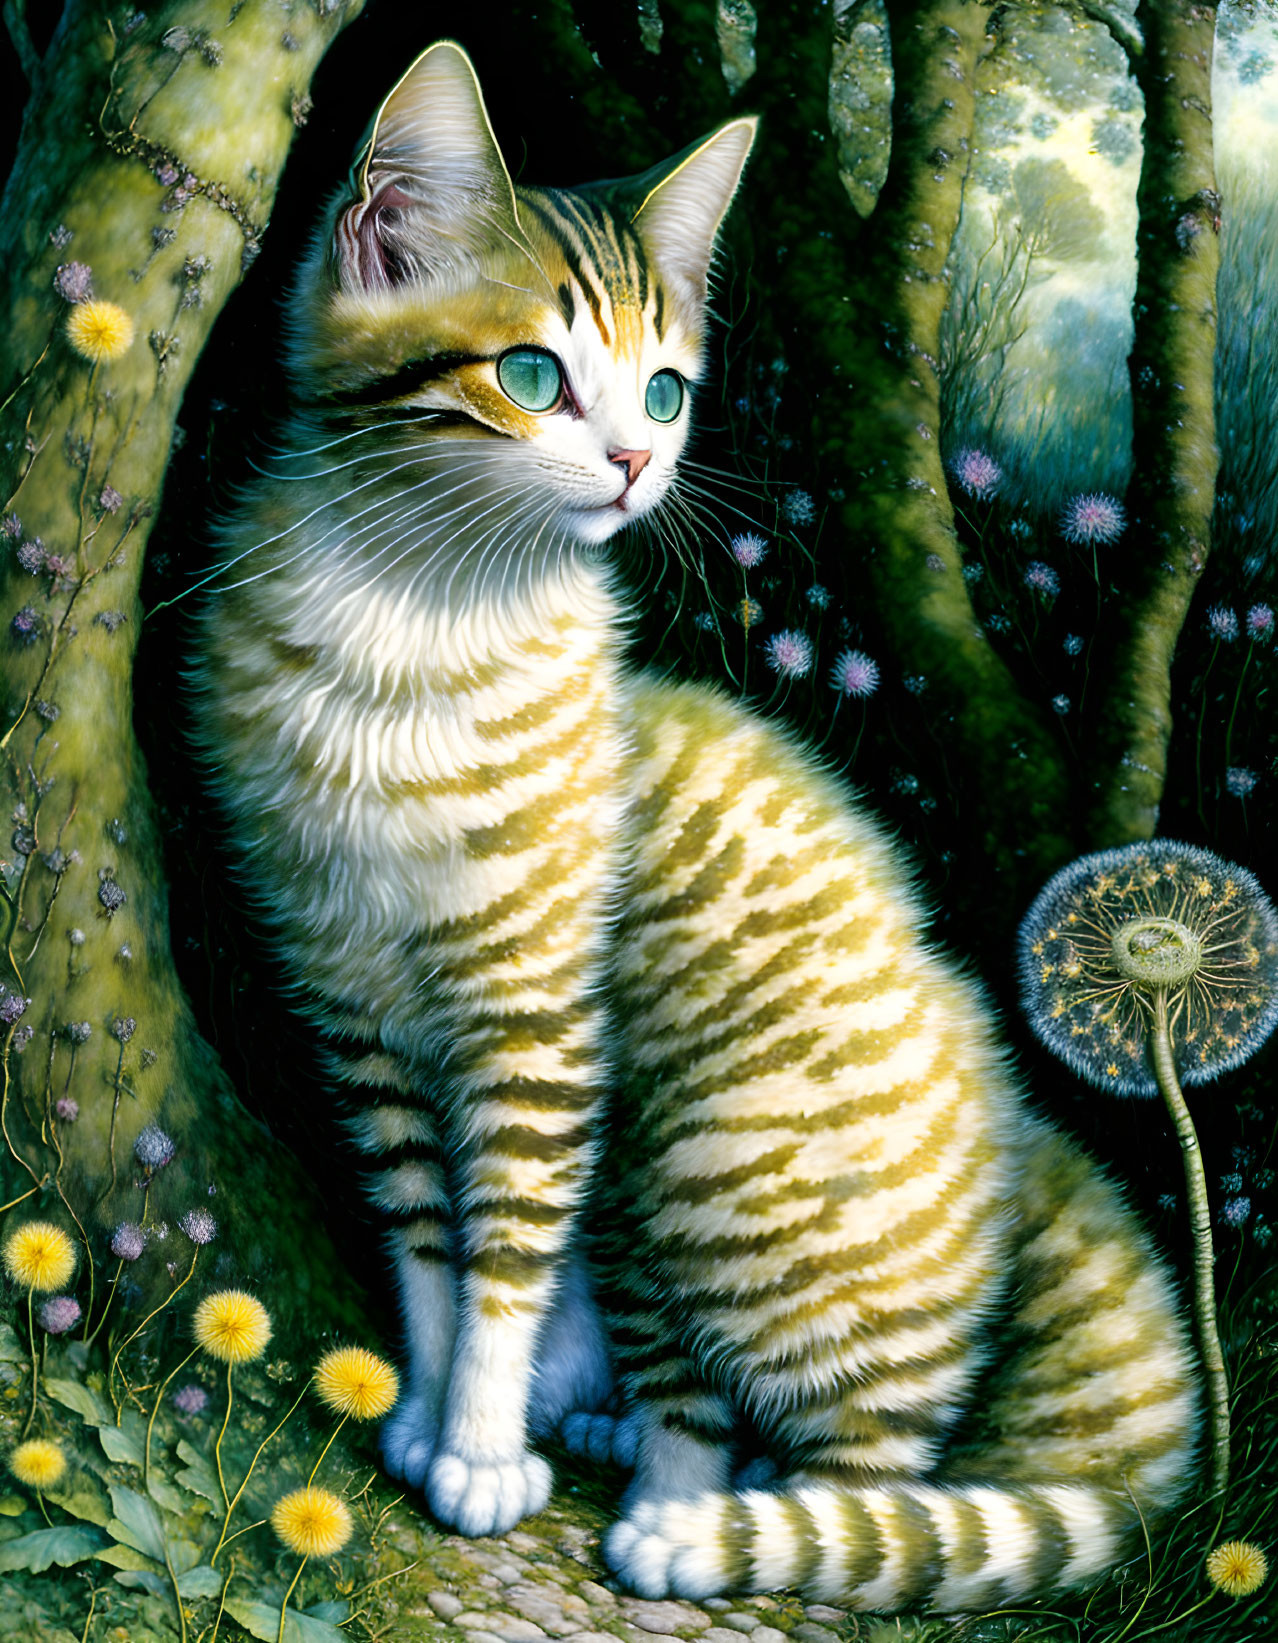 Green-eyed striped cat in hollow tree with dandelions and moss